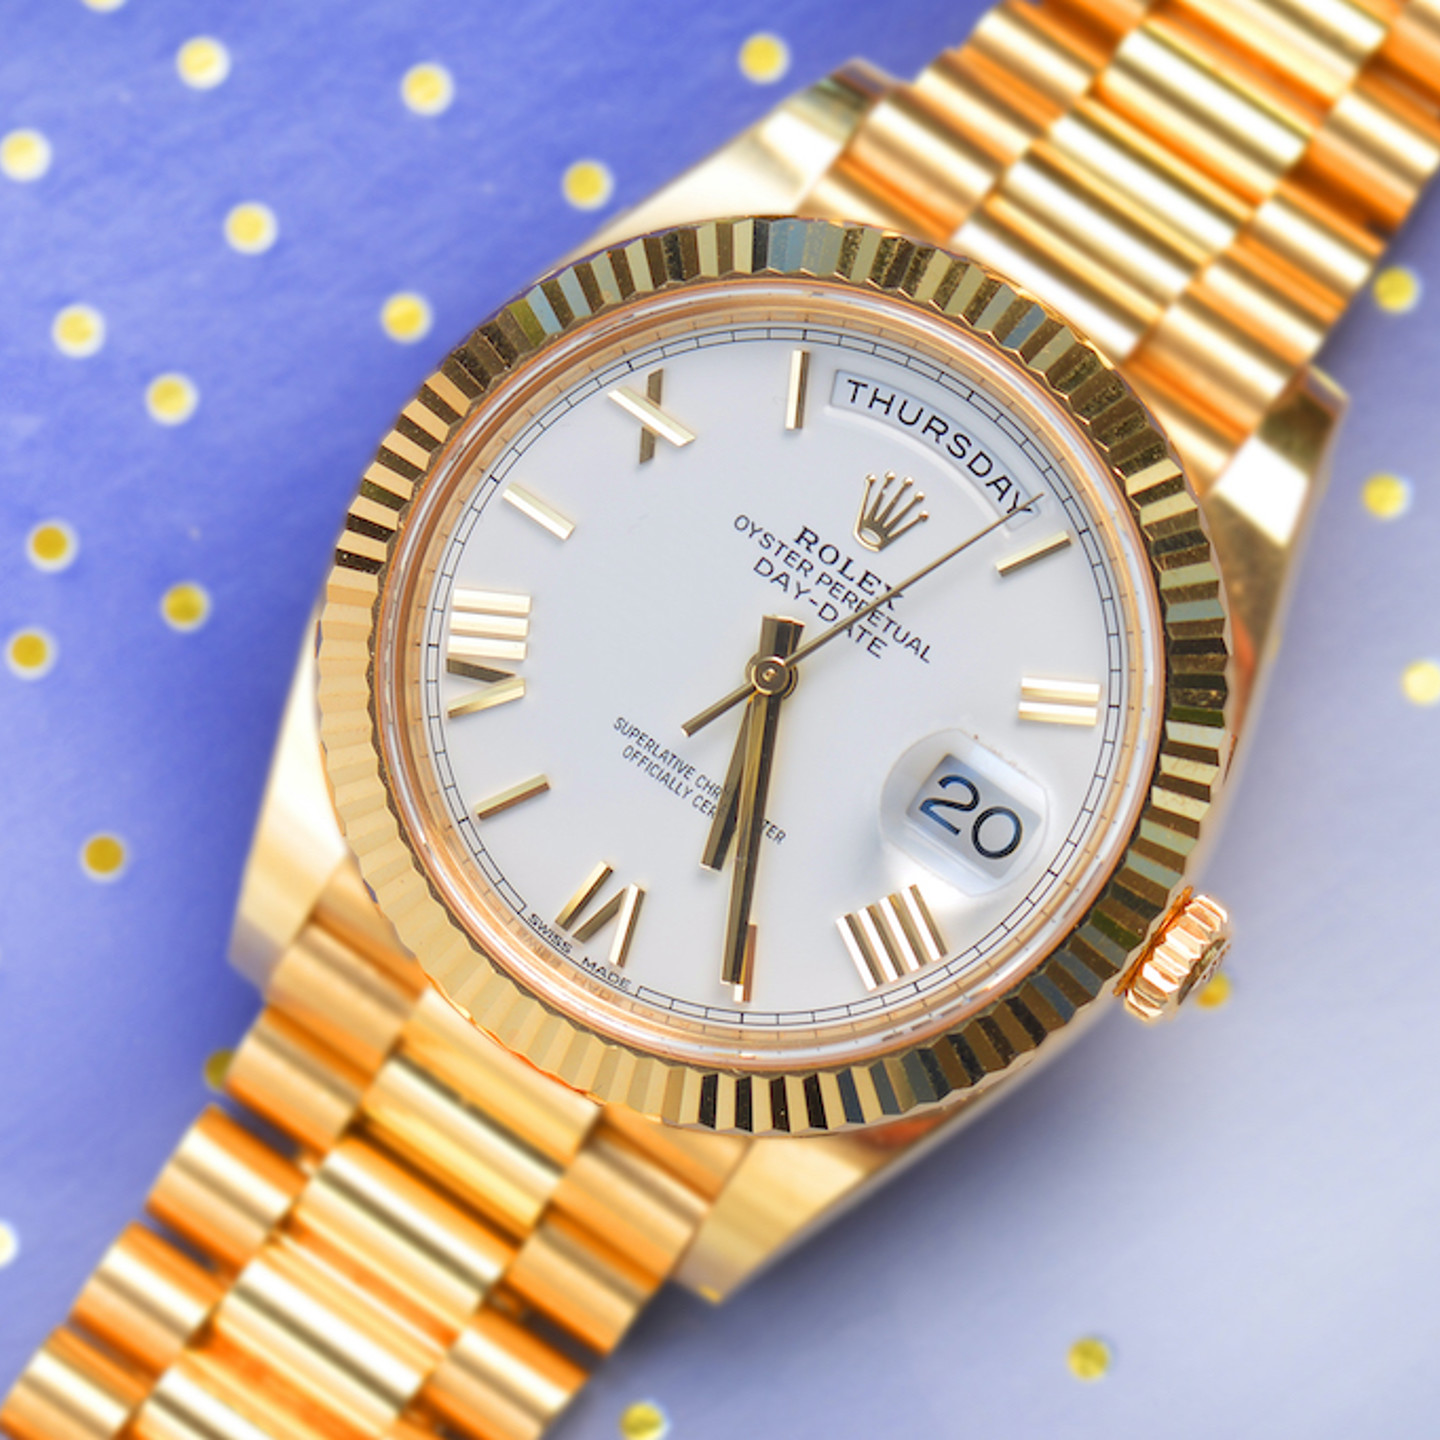 Rolex Oyster Perpetual Day Date 40 18Ct Gold Gentleman's Automatic Wristwatch. Sold For £26,600